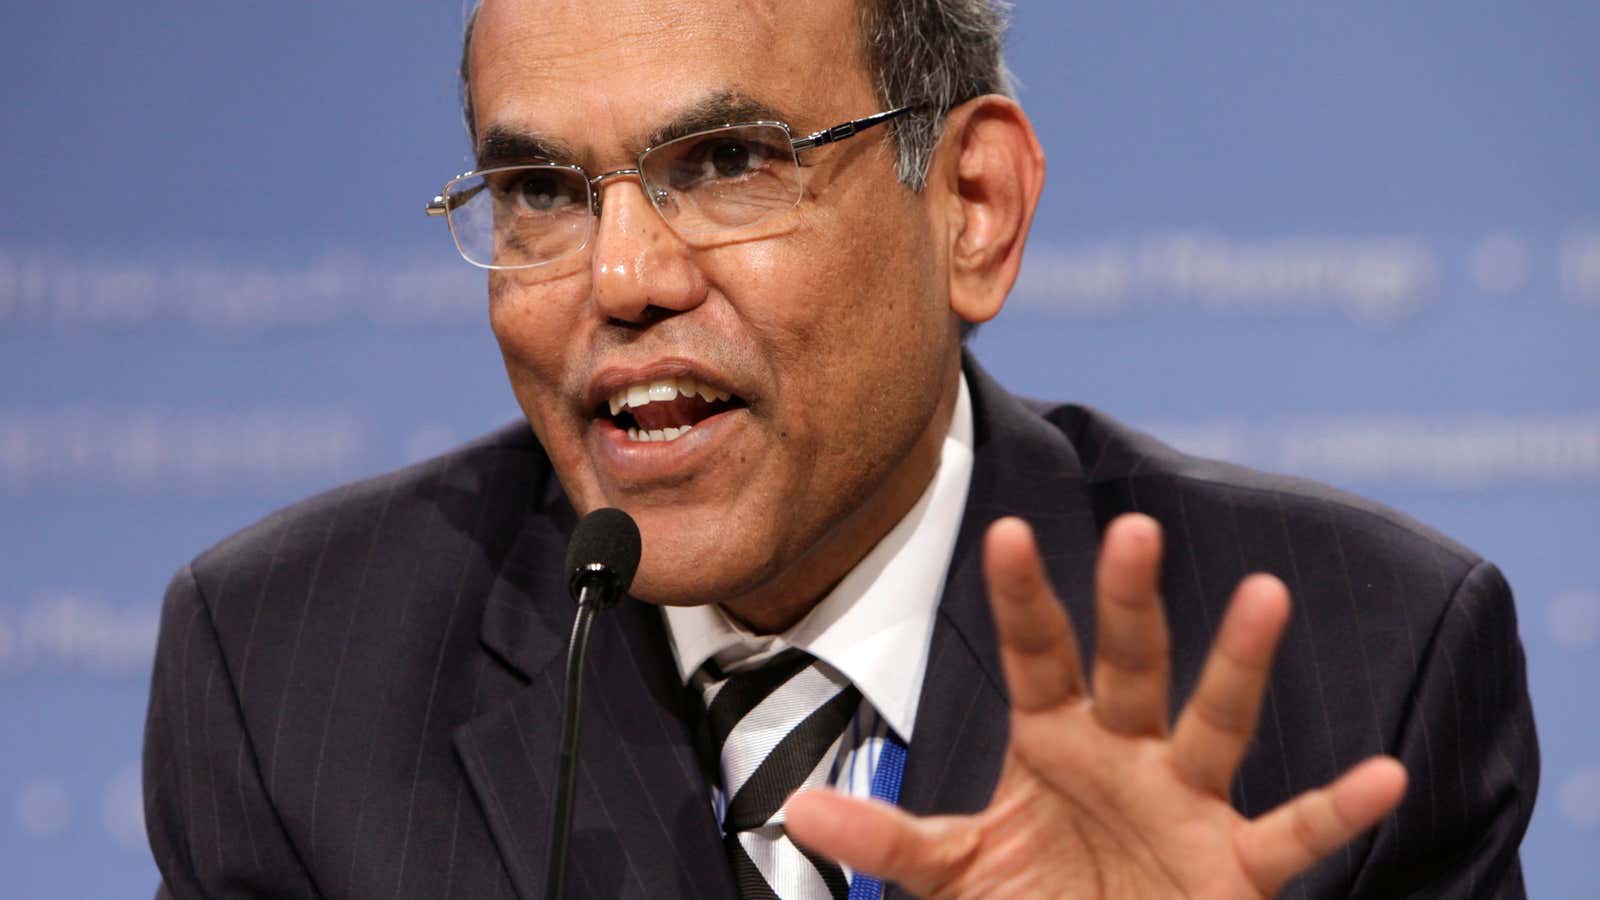 No one wants to be India’s central bank governor right now.